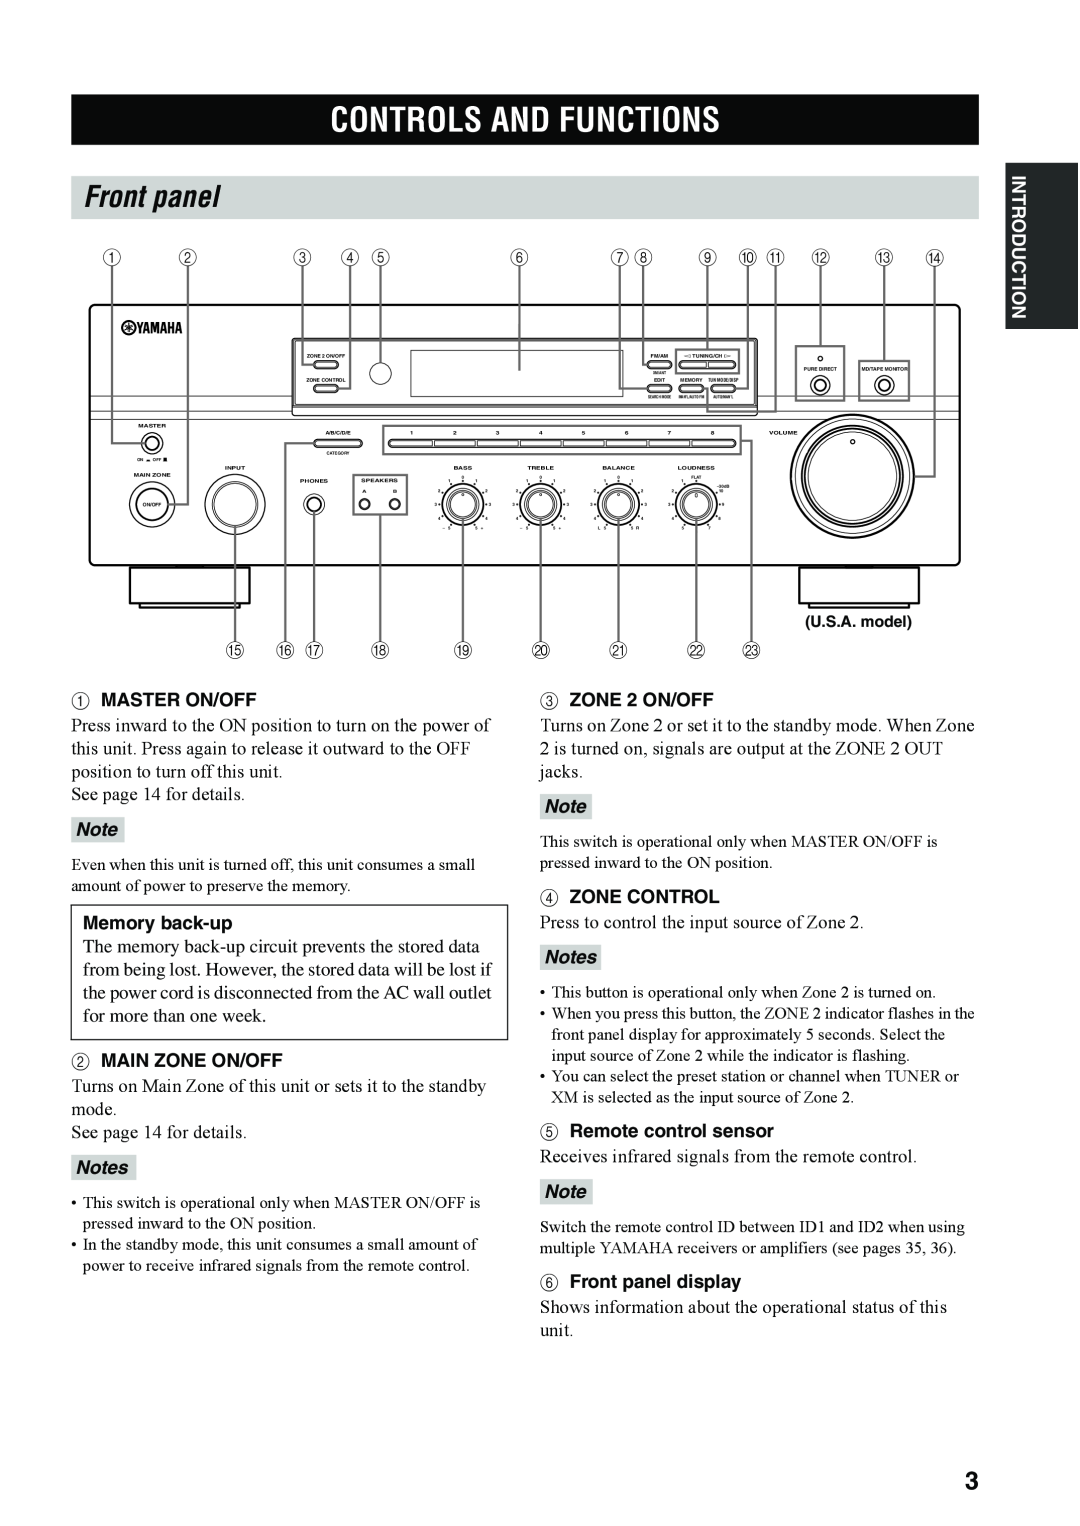 Yamaha RX-497 owner manual Controls And Functions, Front panel 